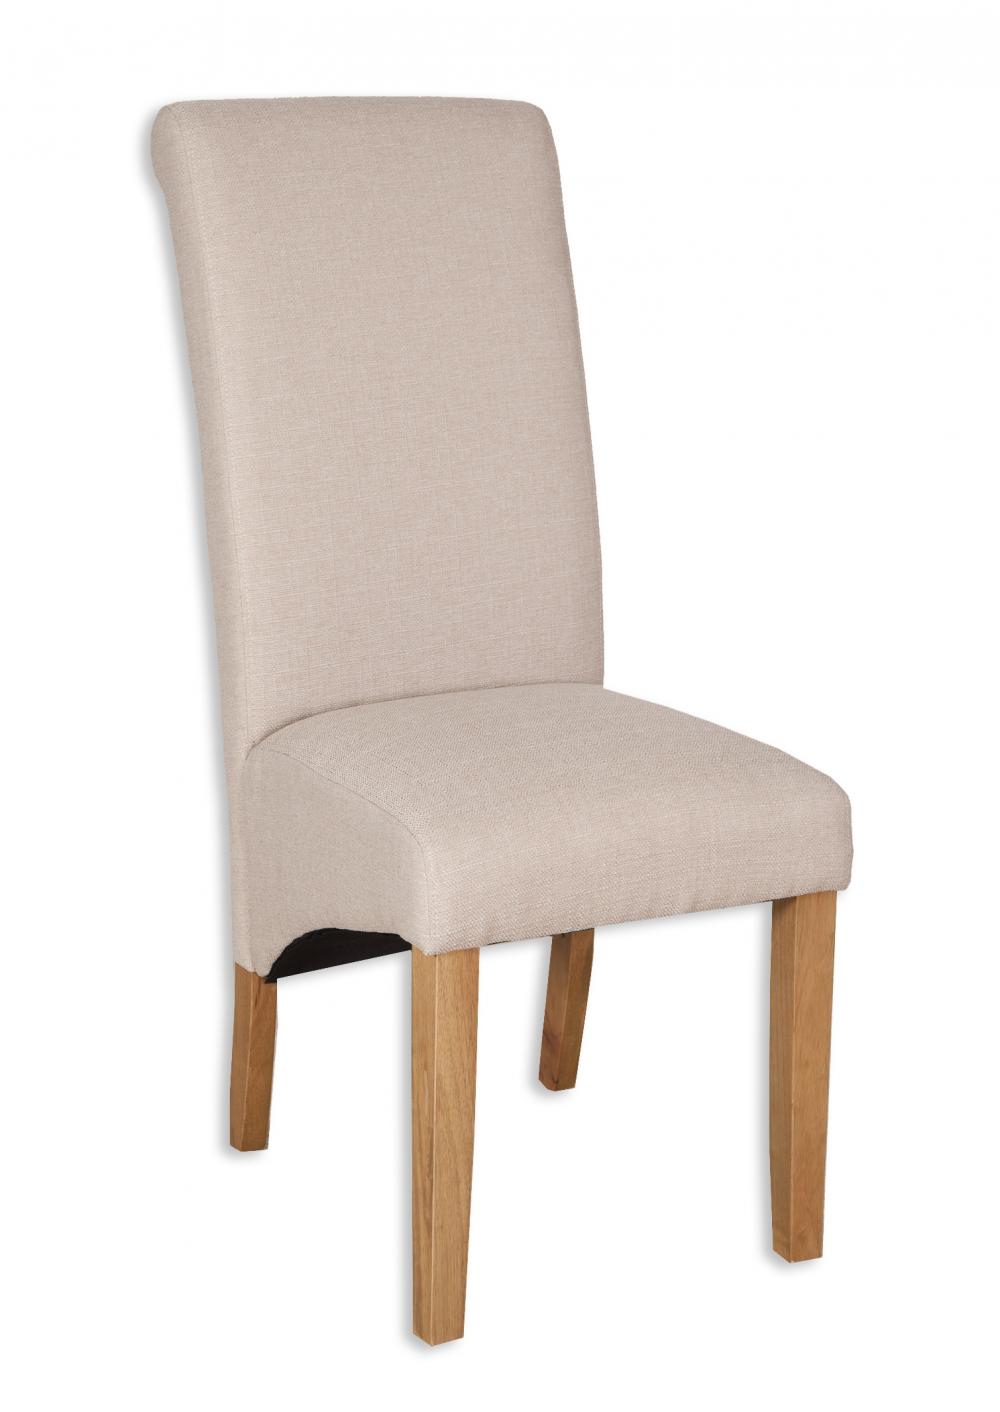 Natural Cream Fabric Dining Chair £149